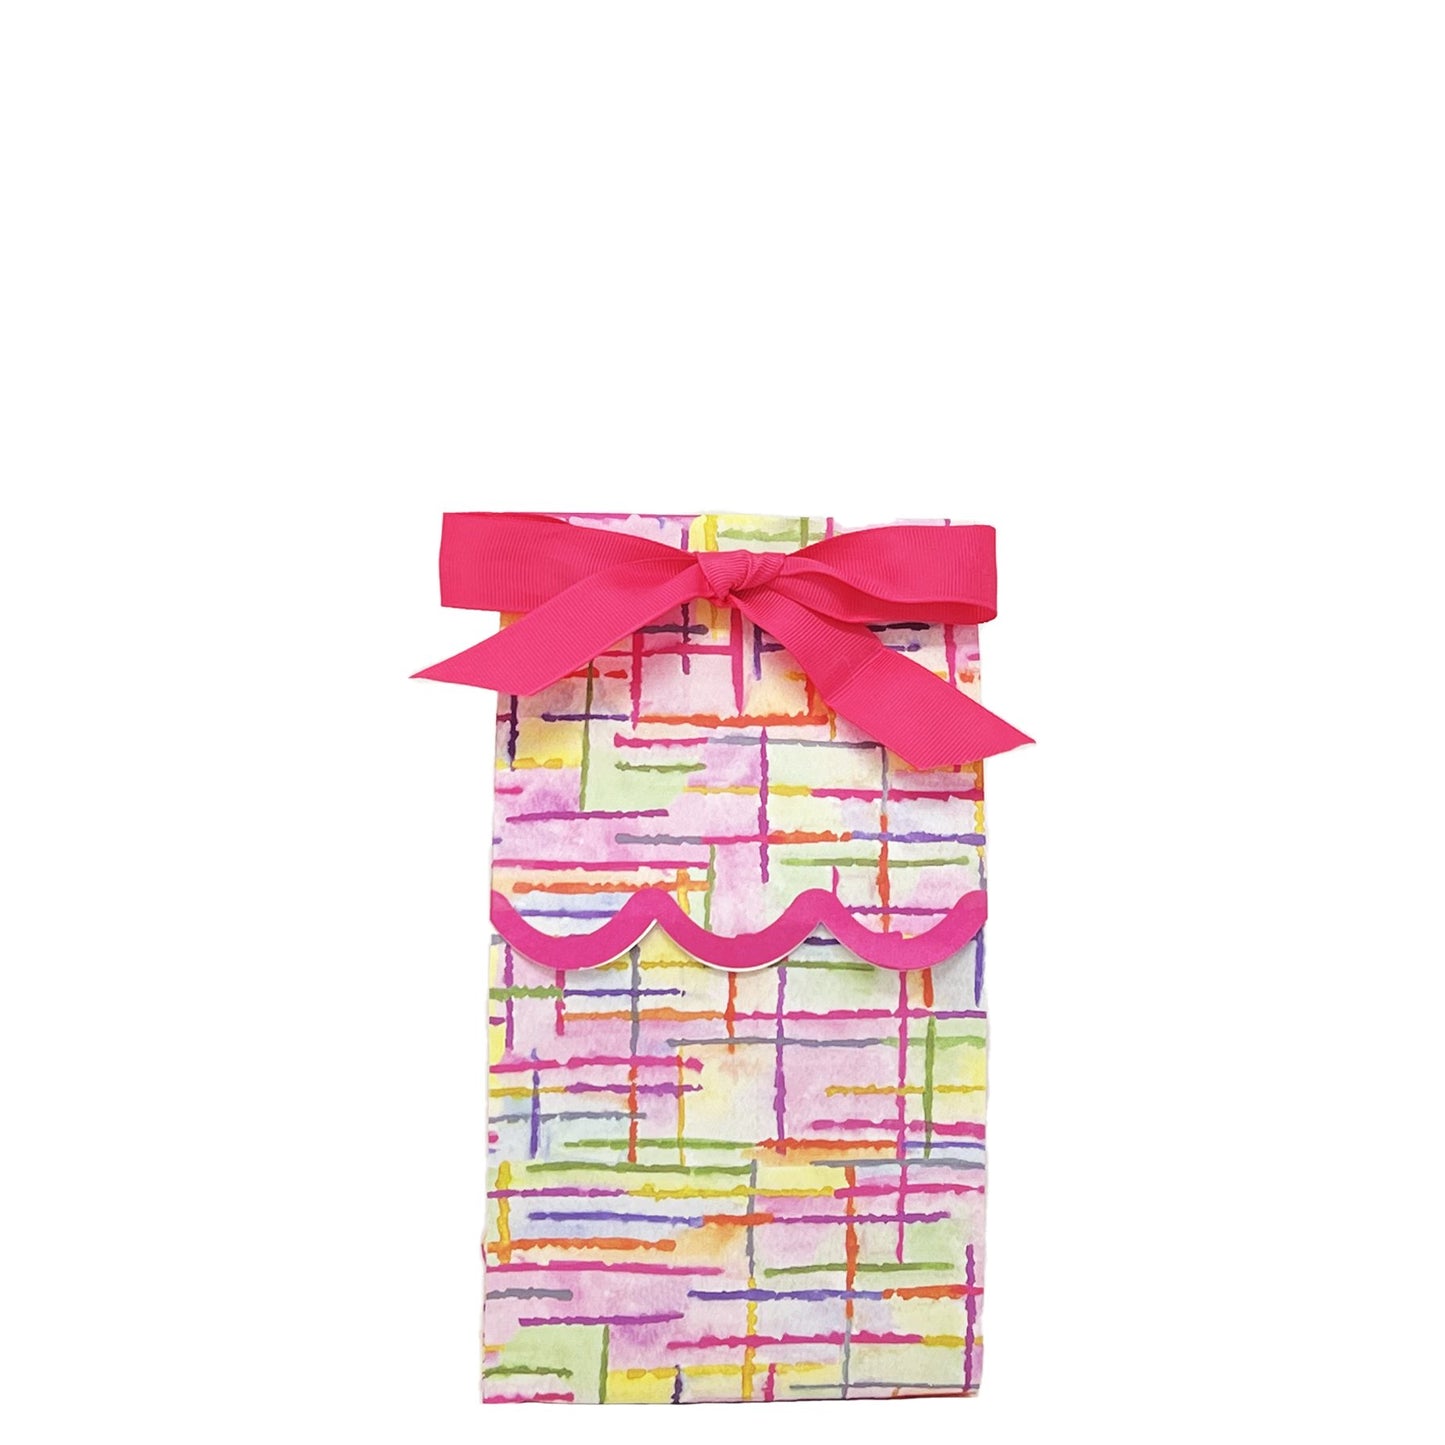 Paper wine bag featuring a multicolored stripe pattern tied as a gift bag with a pink bow